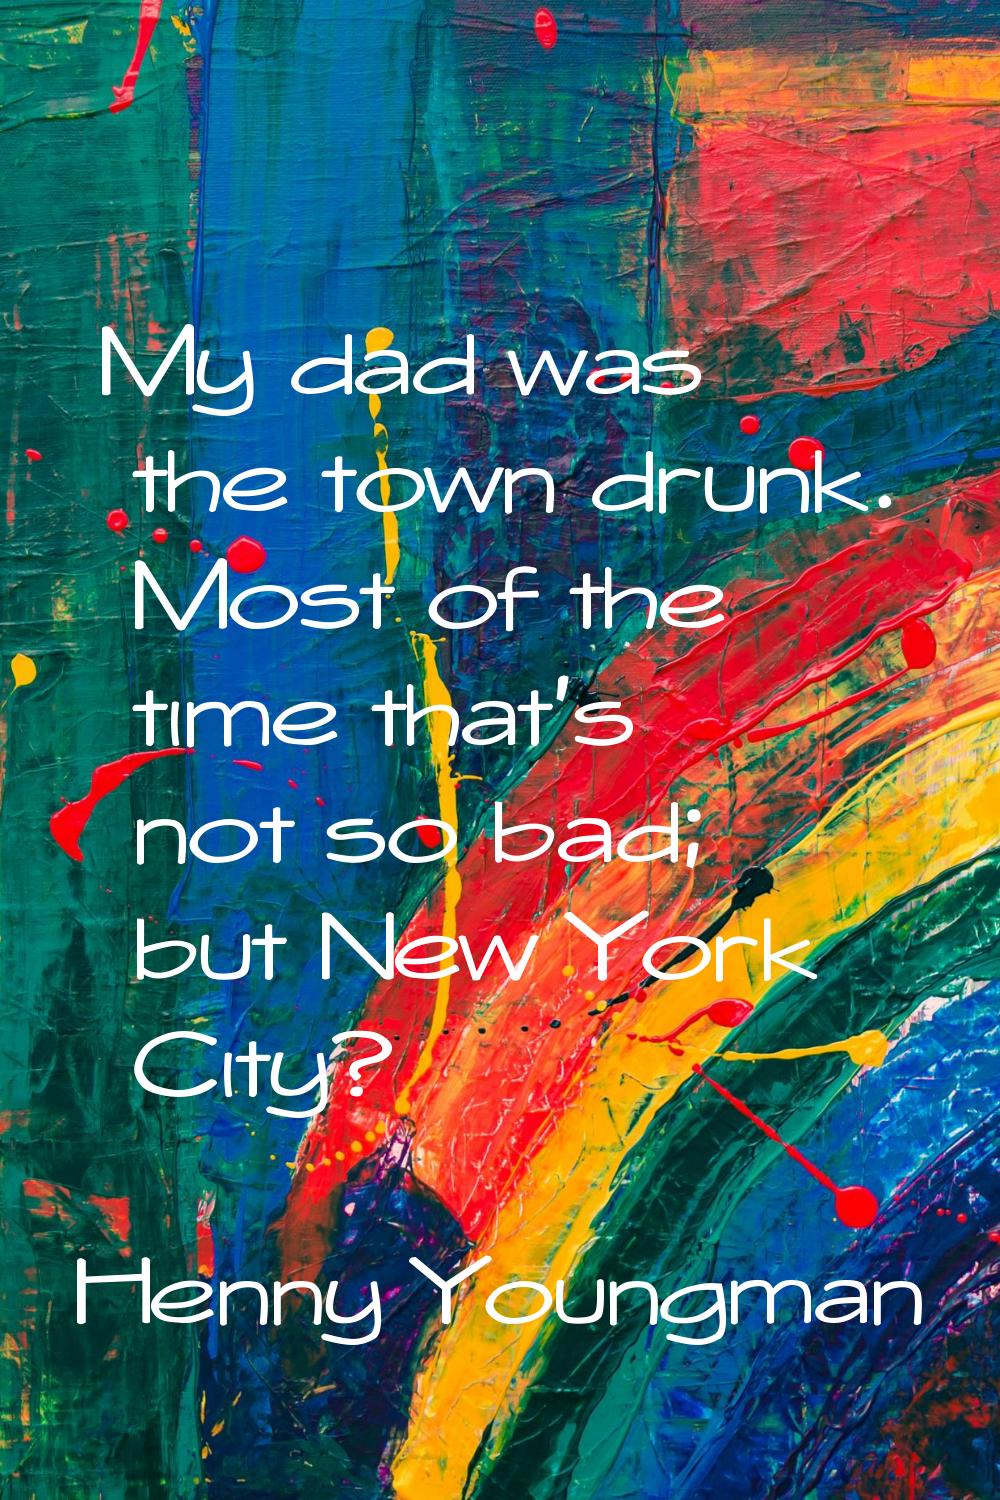 My dad was the town drunk. Most of the time that's not so bad; but New York City?